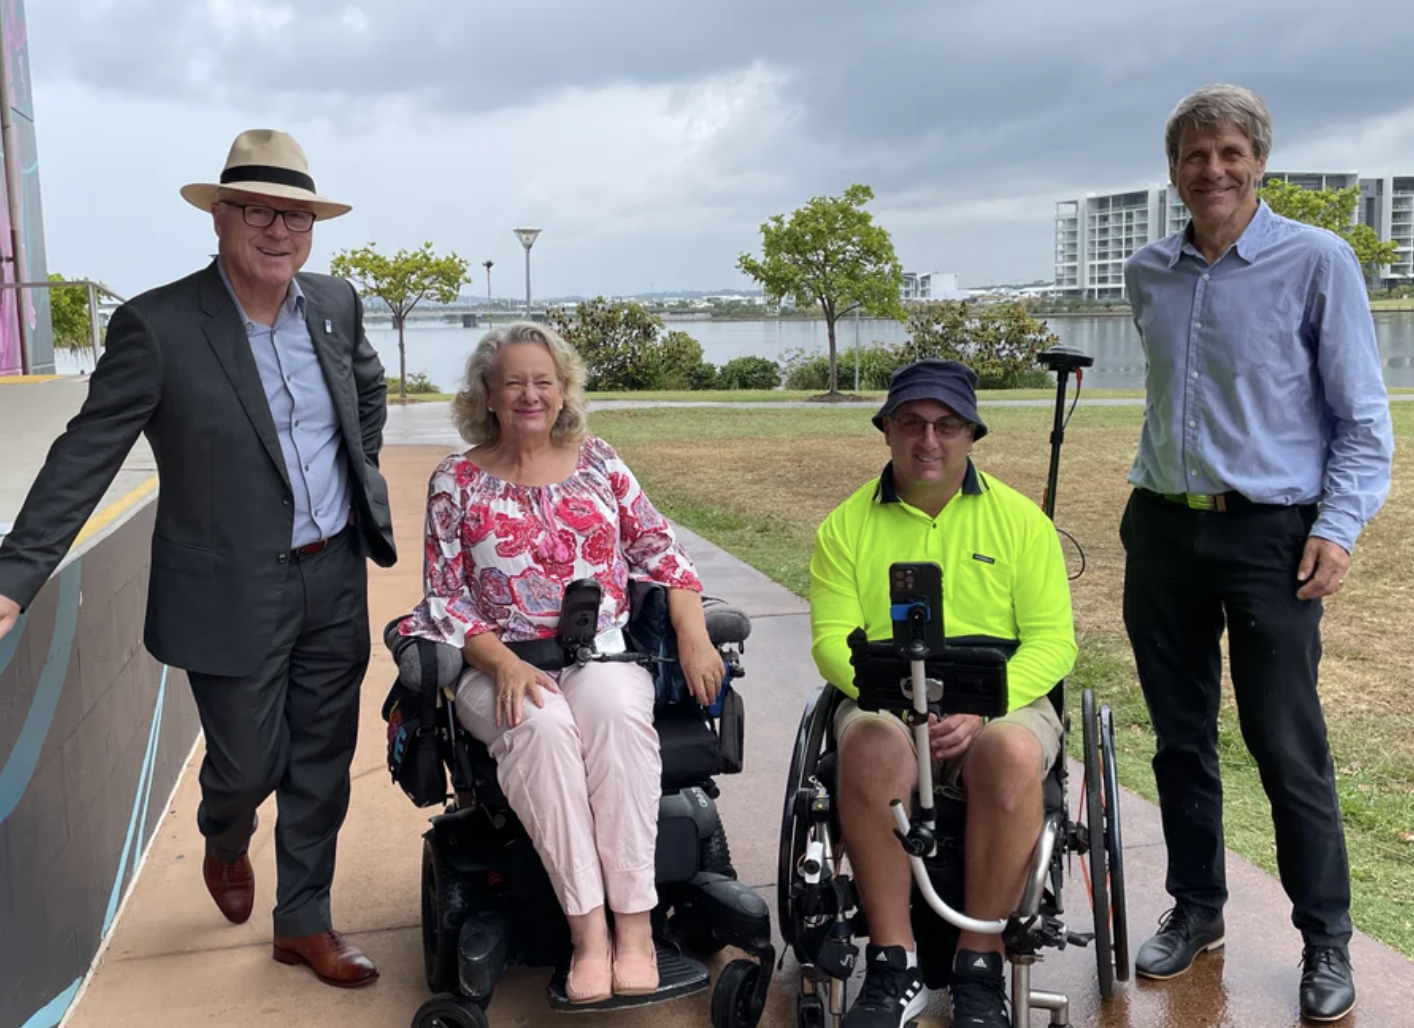 photo of four smiling people - two are standing, two in wheelchairs